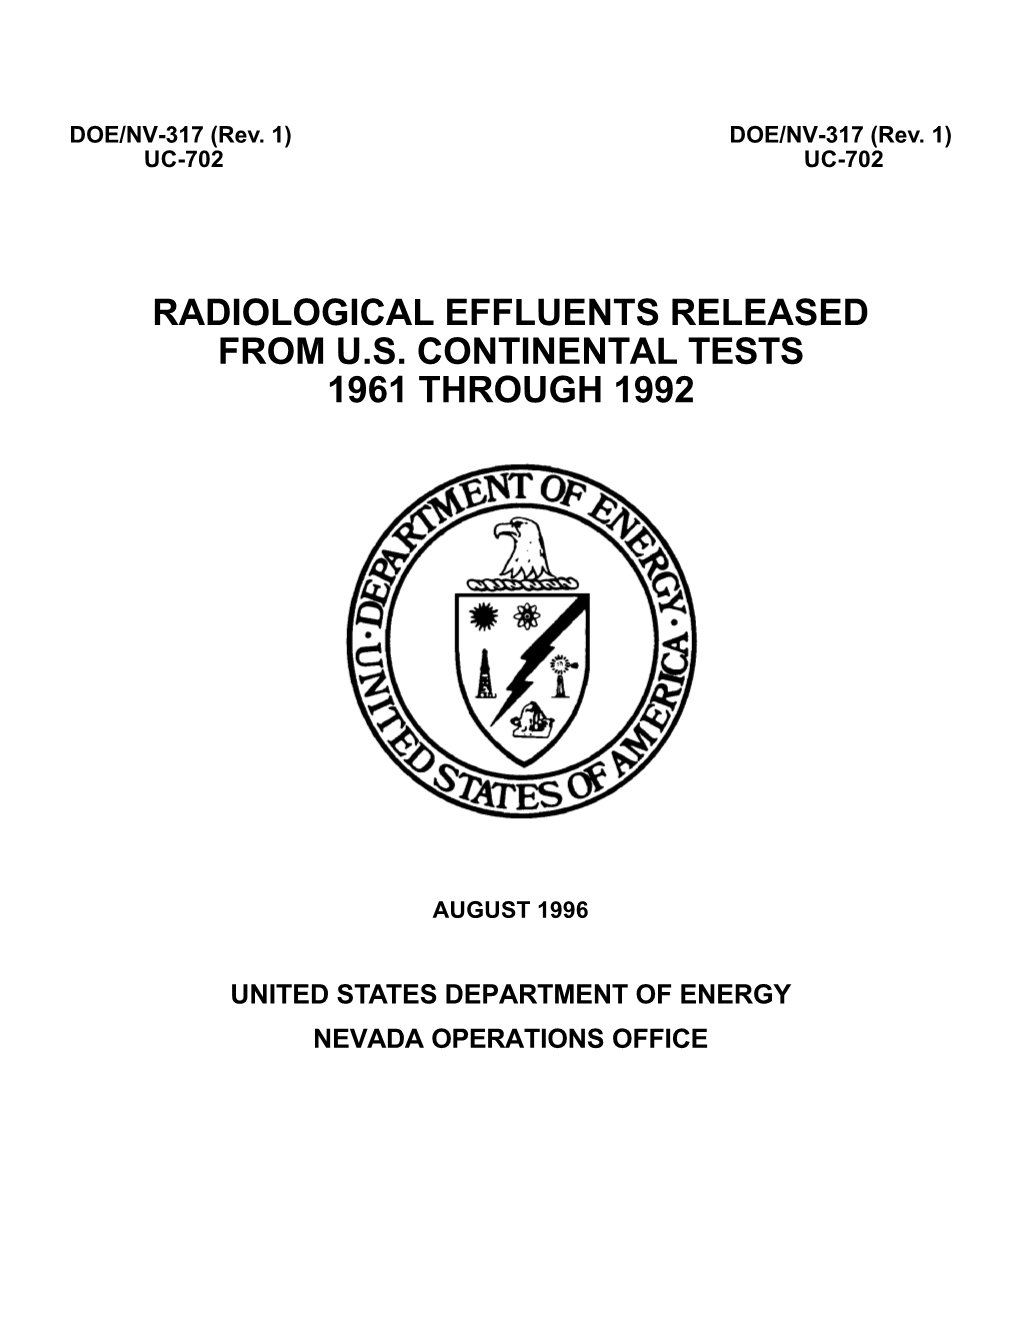 Radiological Effluents Released from U. S. Continental Tests 1961